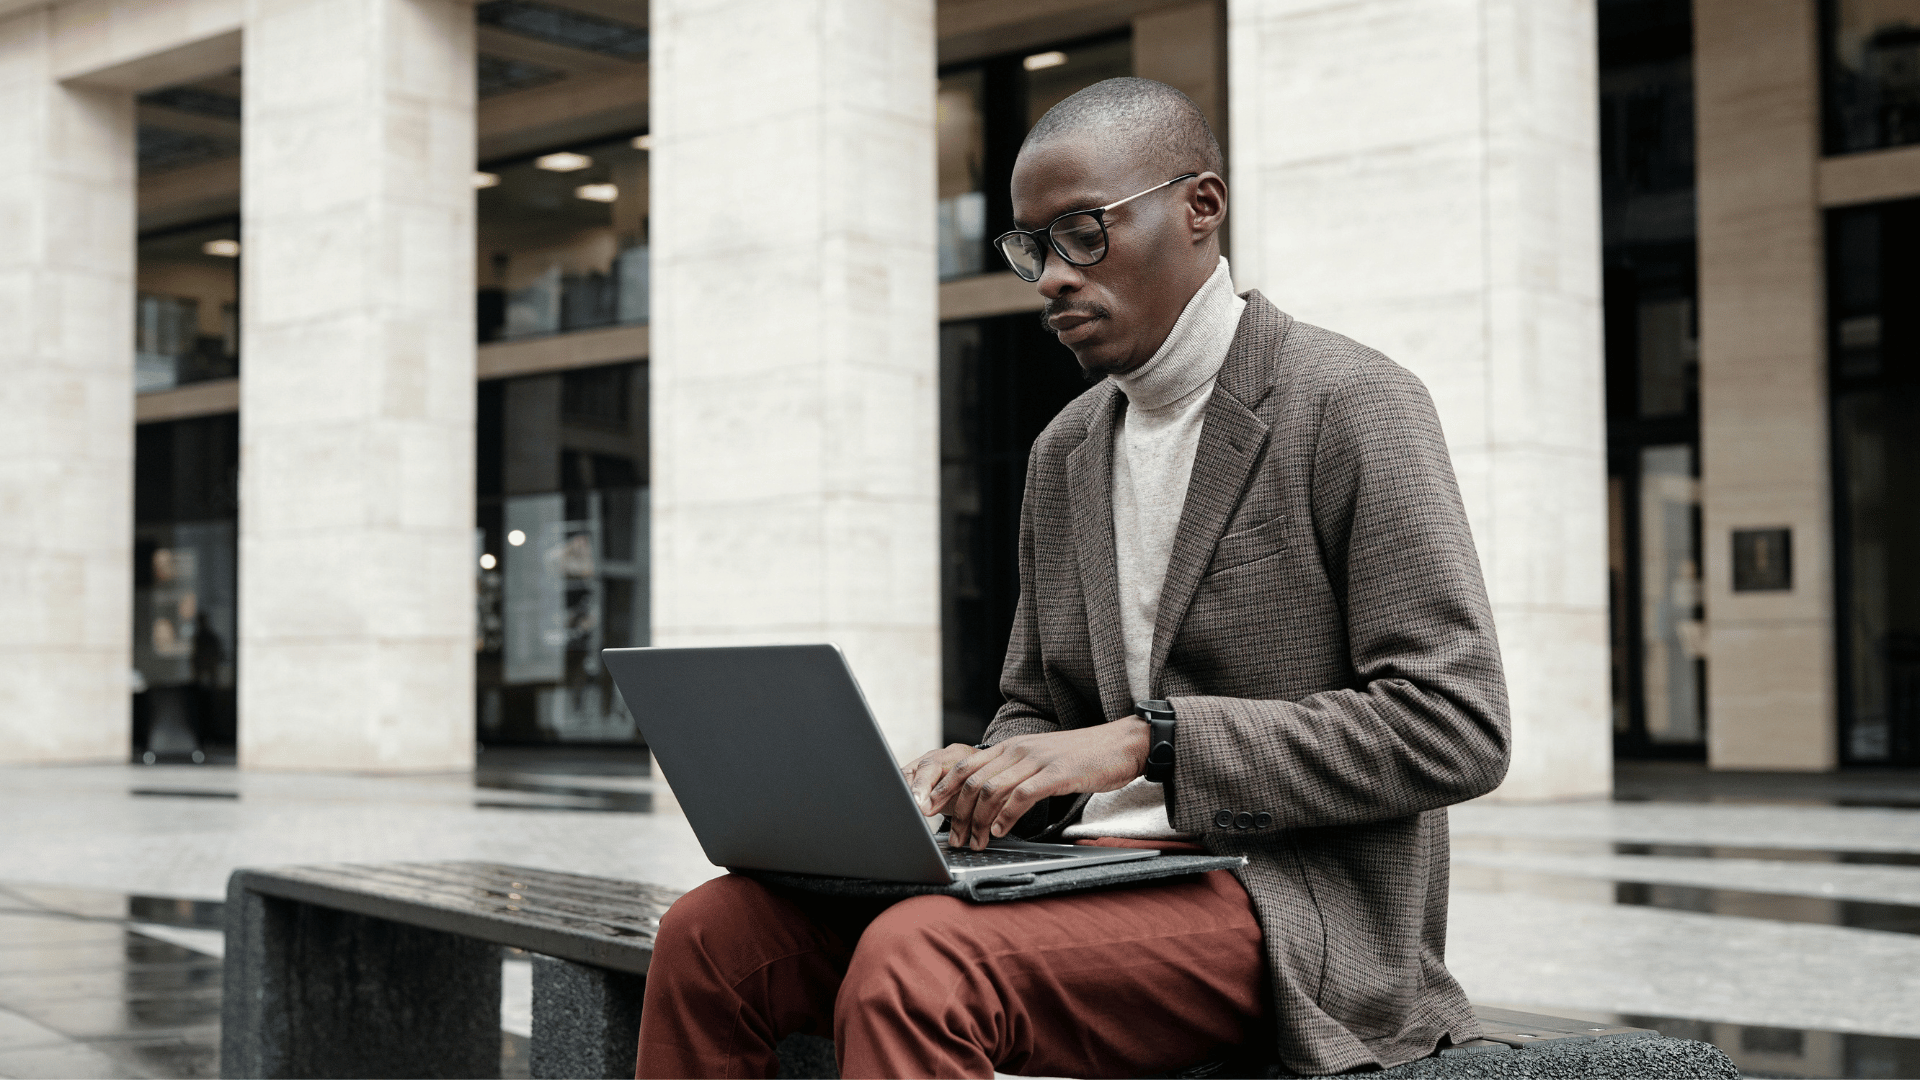 An African American man sits on a bench with his laptop open on his lap.